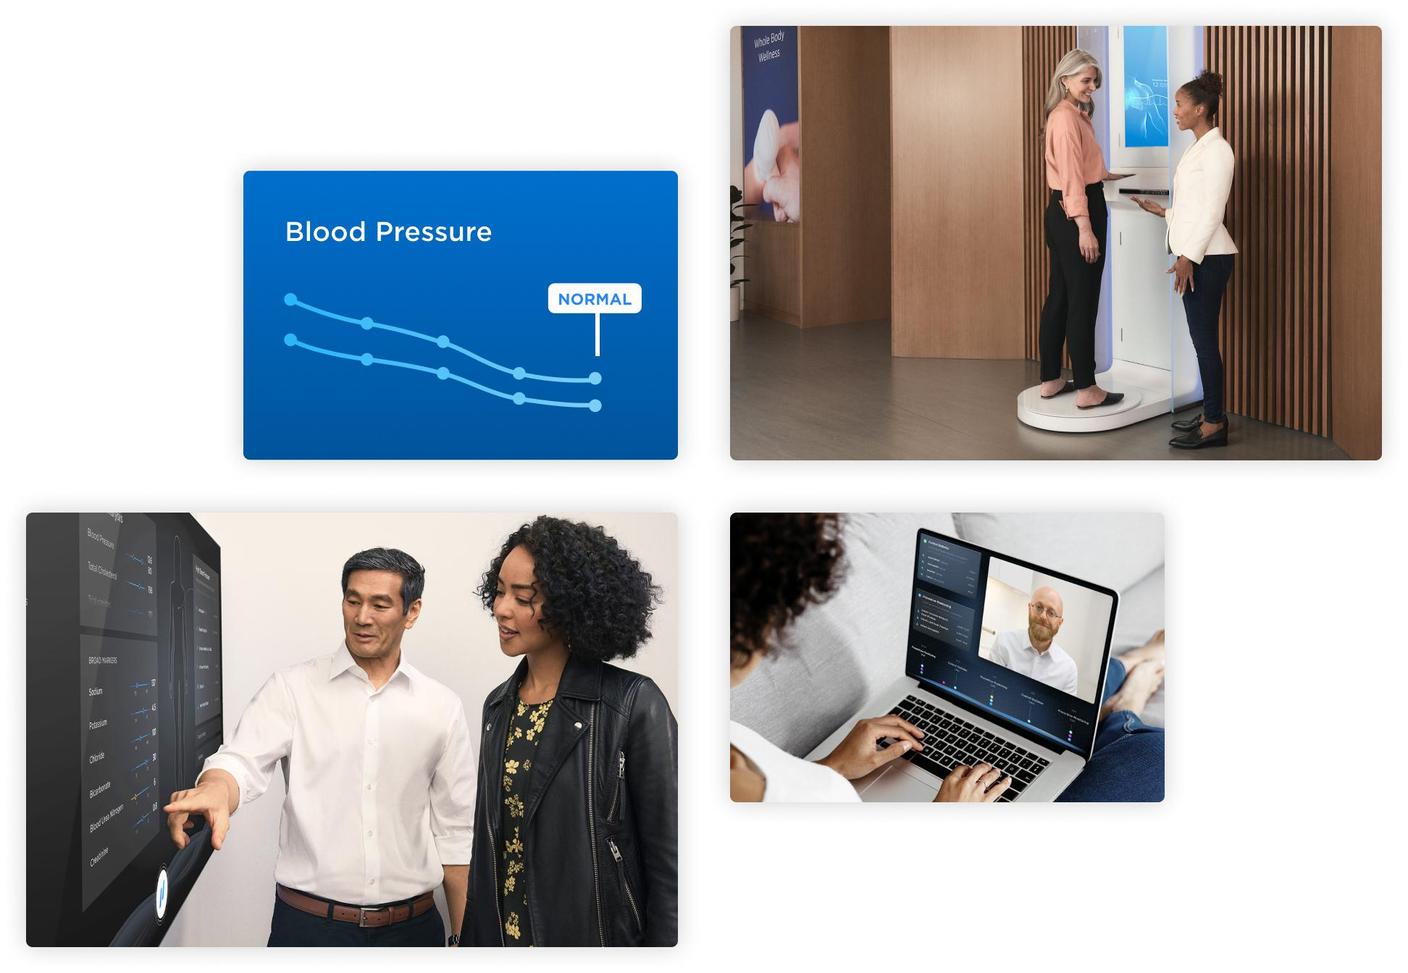 A grid of images featuring a descending blood pressure graph, a body scanner, a doctor and patient in a visit, and a patient in a telehealth visit.